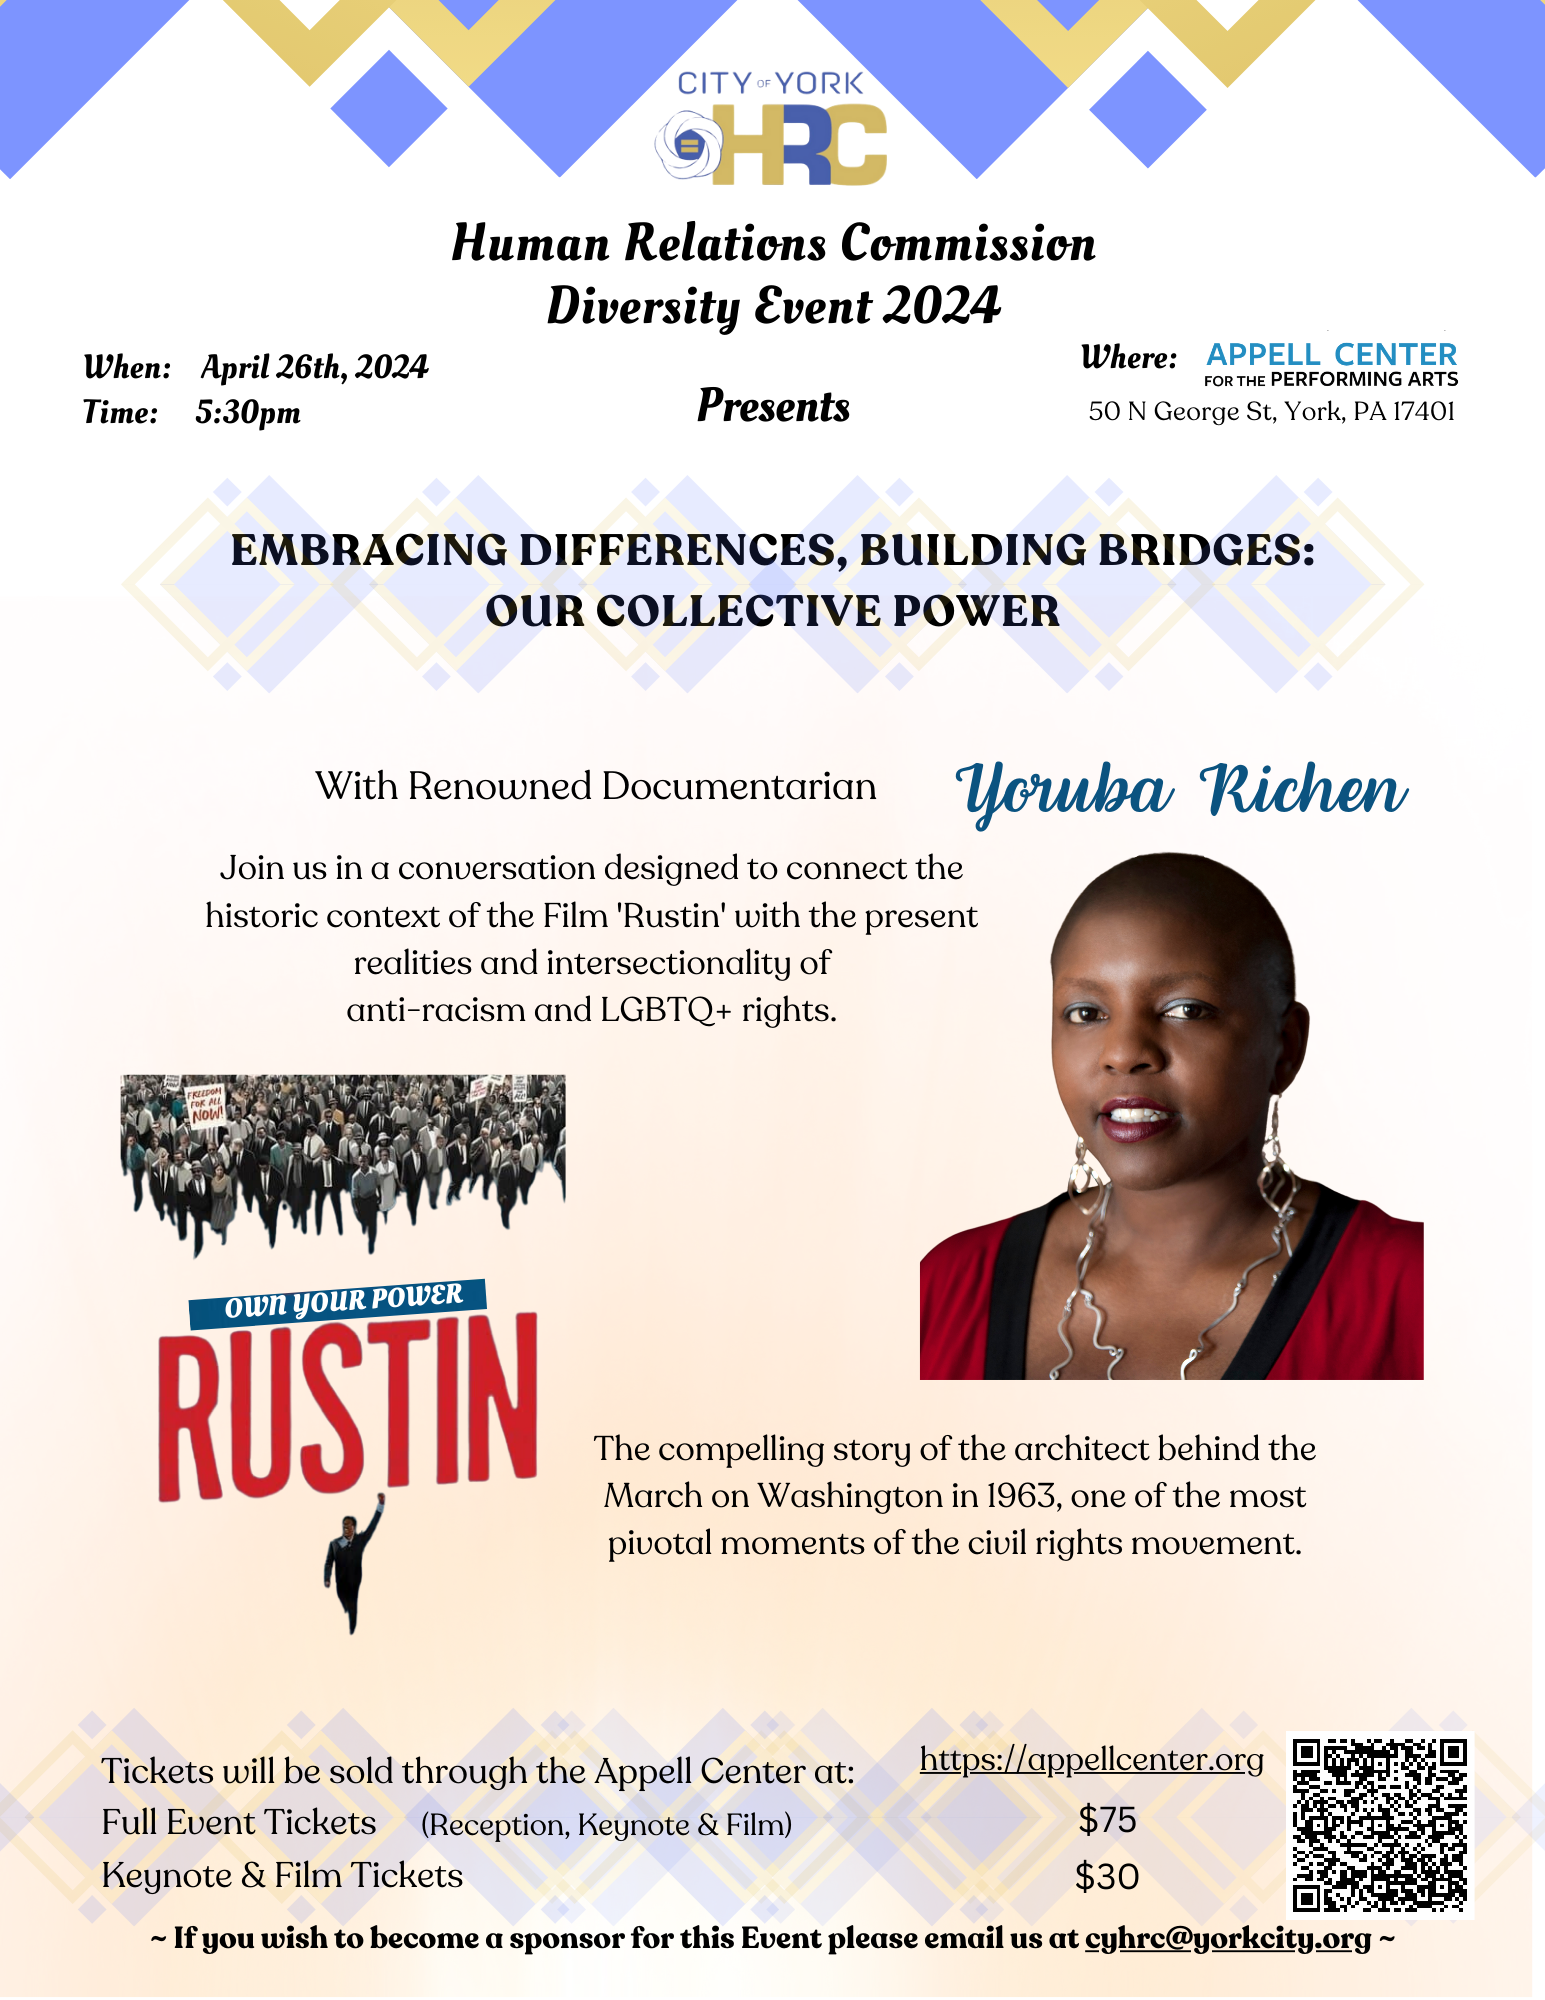 Human Relations Commission Diversity Event 2024